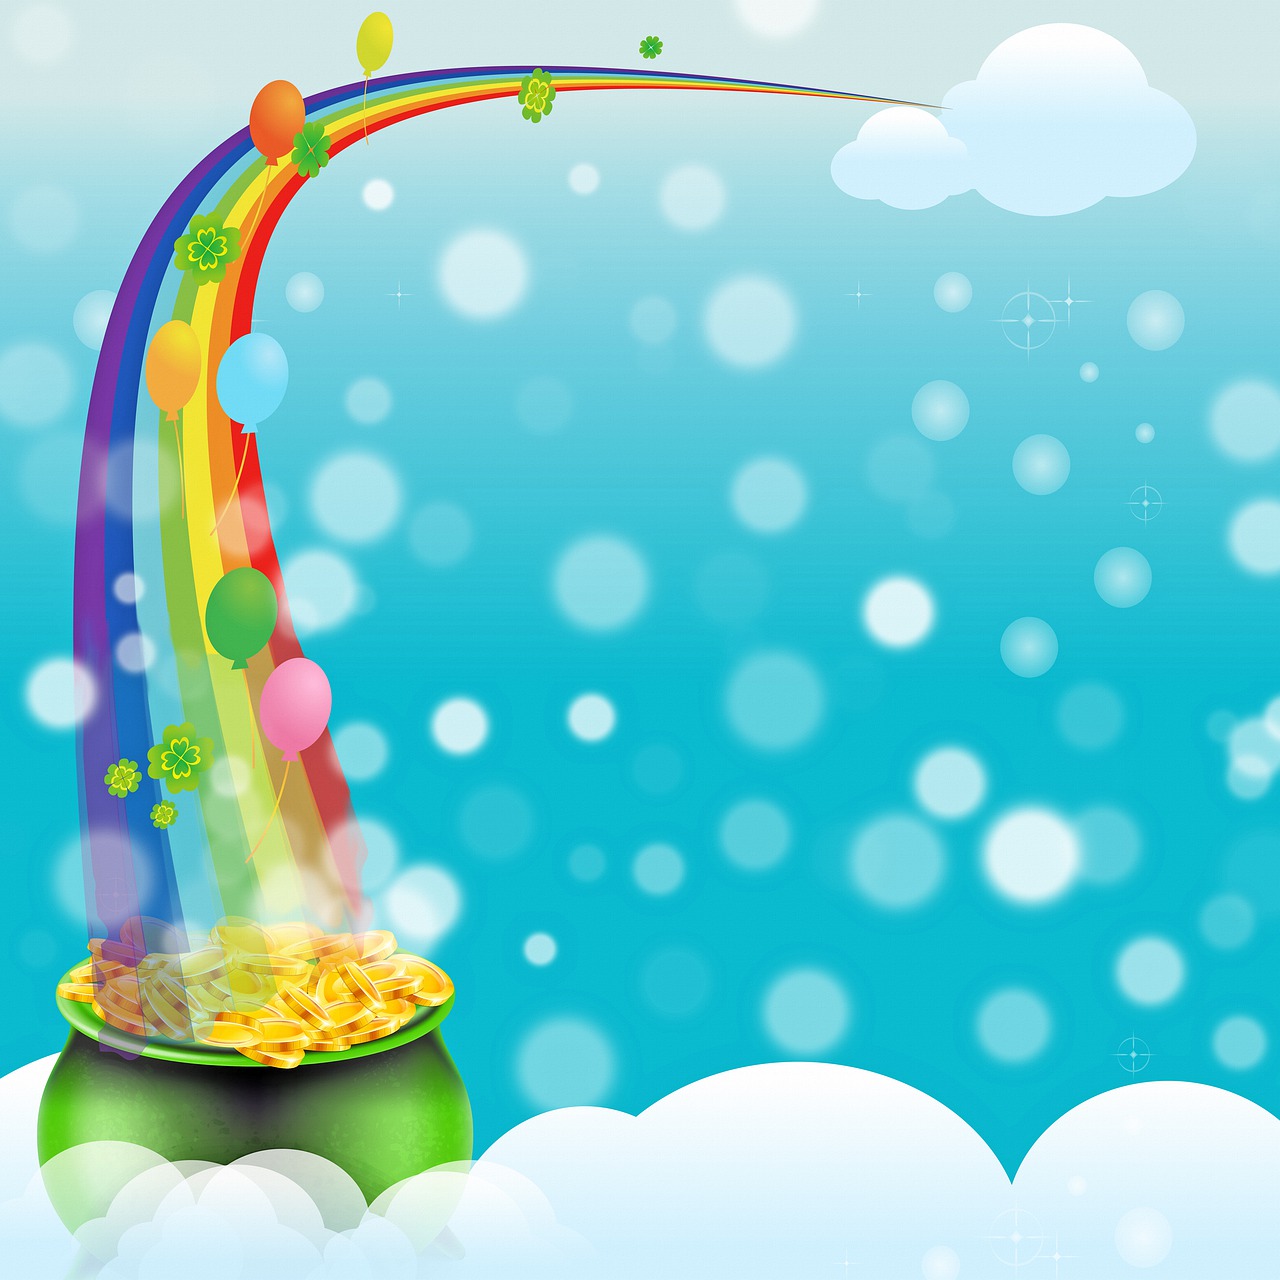 a pot of gold with a rainbow coming out of it, an illustration of, conceptual art, bubble background, air brush illustration, random background scene, confetti